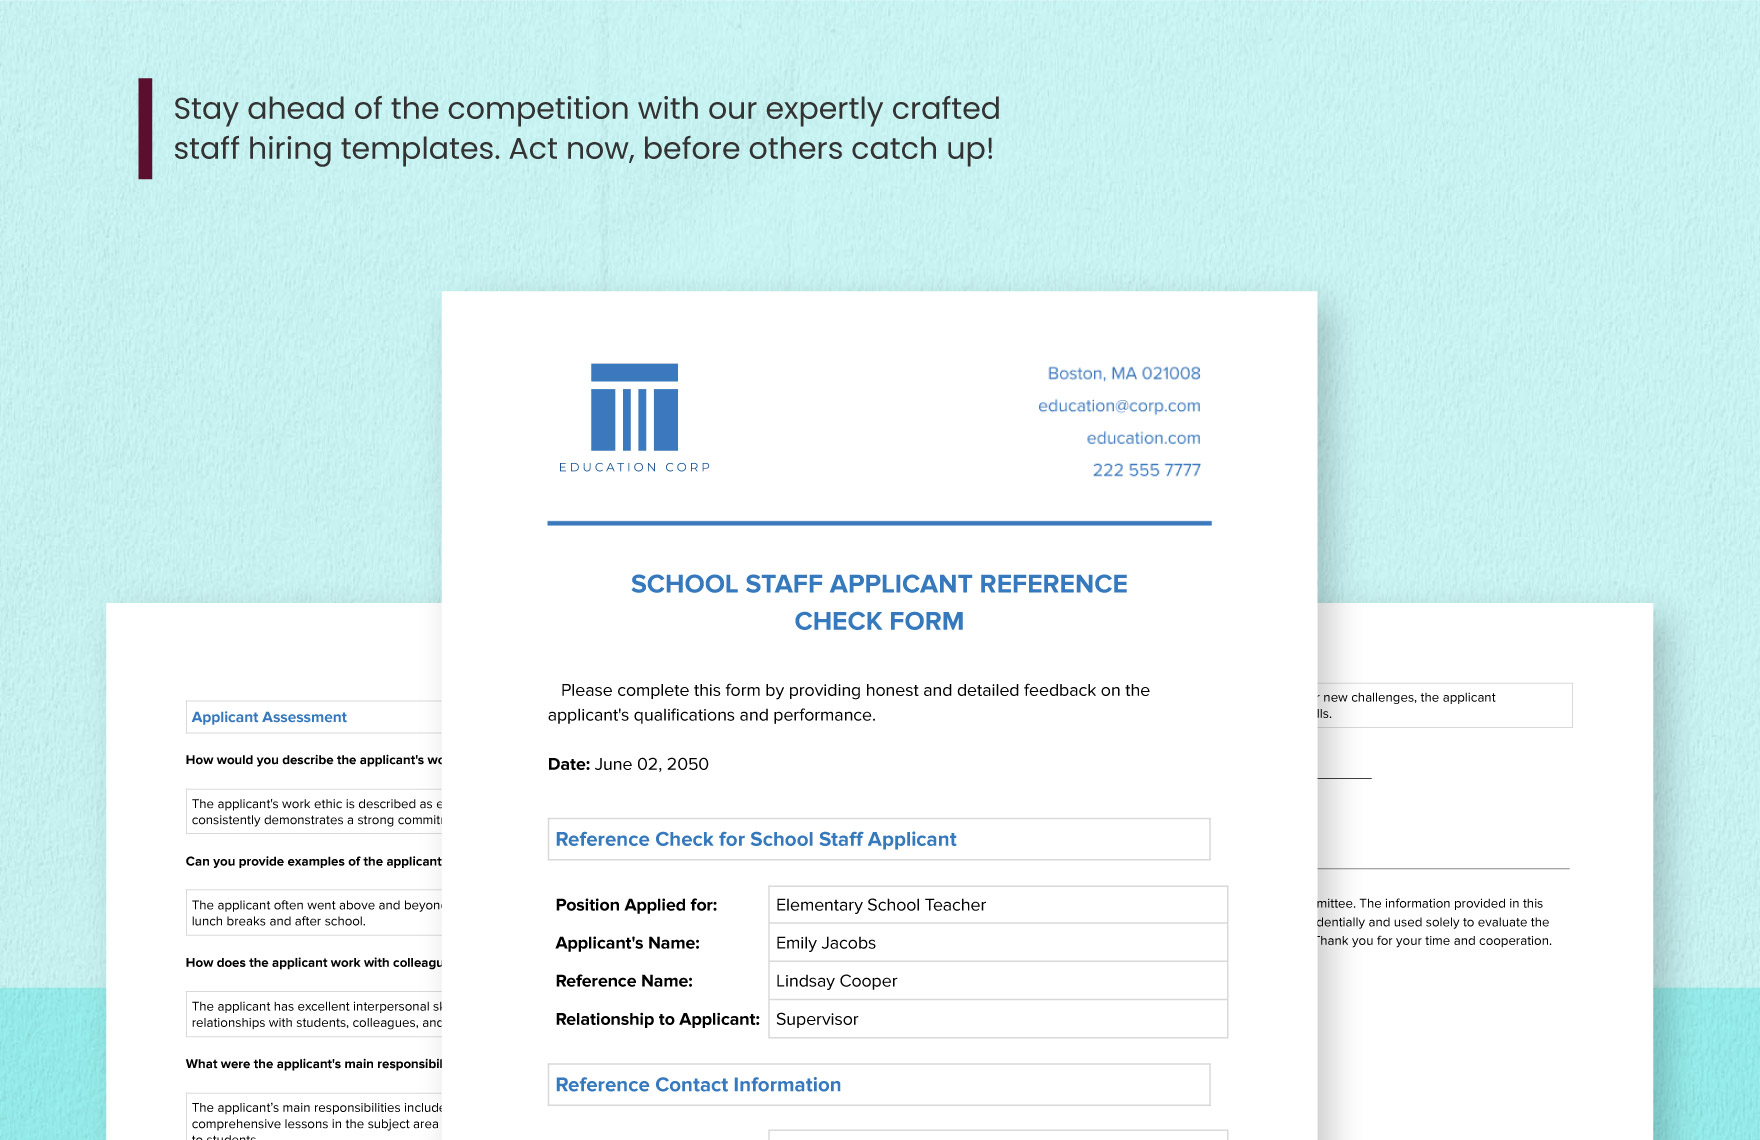 School Staff Applicant Reference Check Form Template